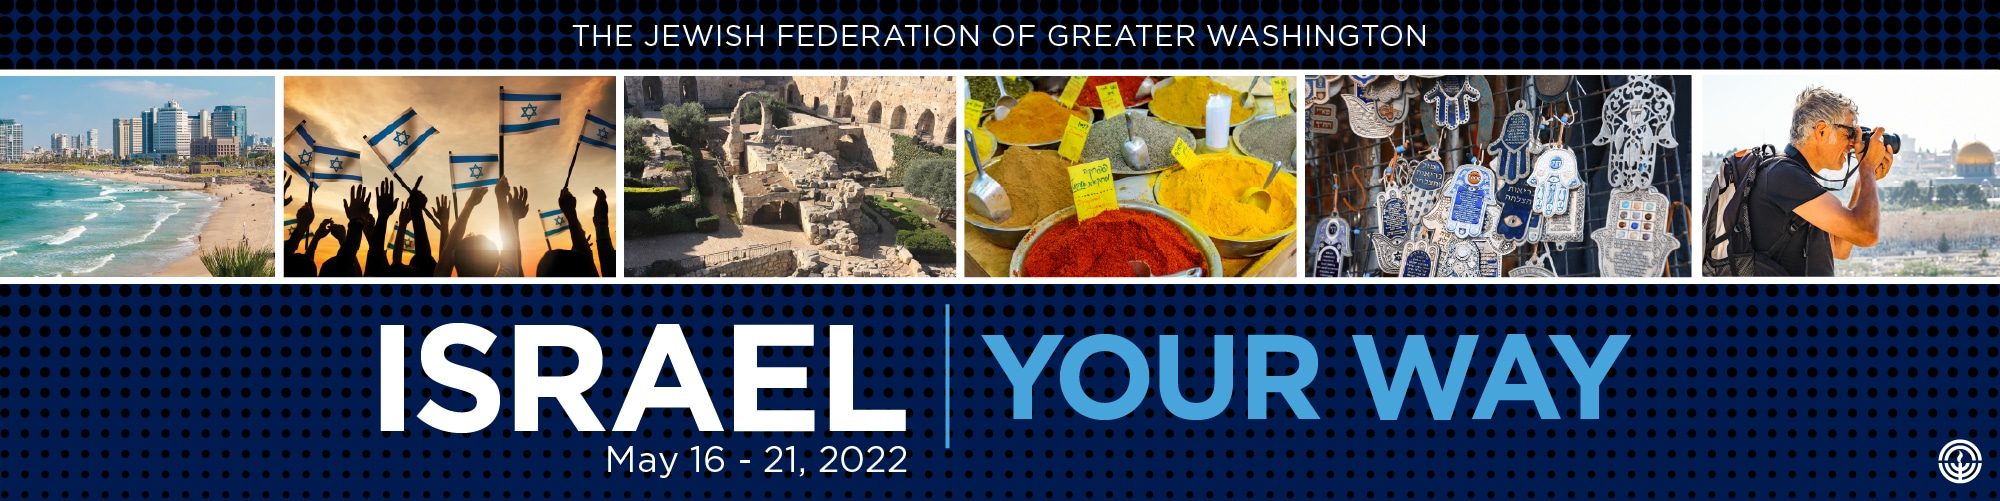 Israel YOUR Way Banner